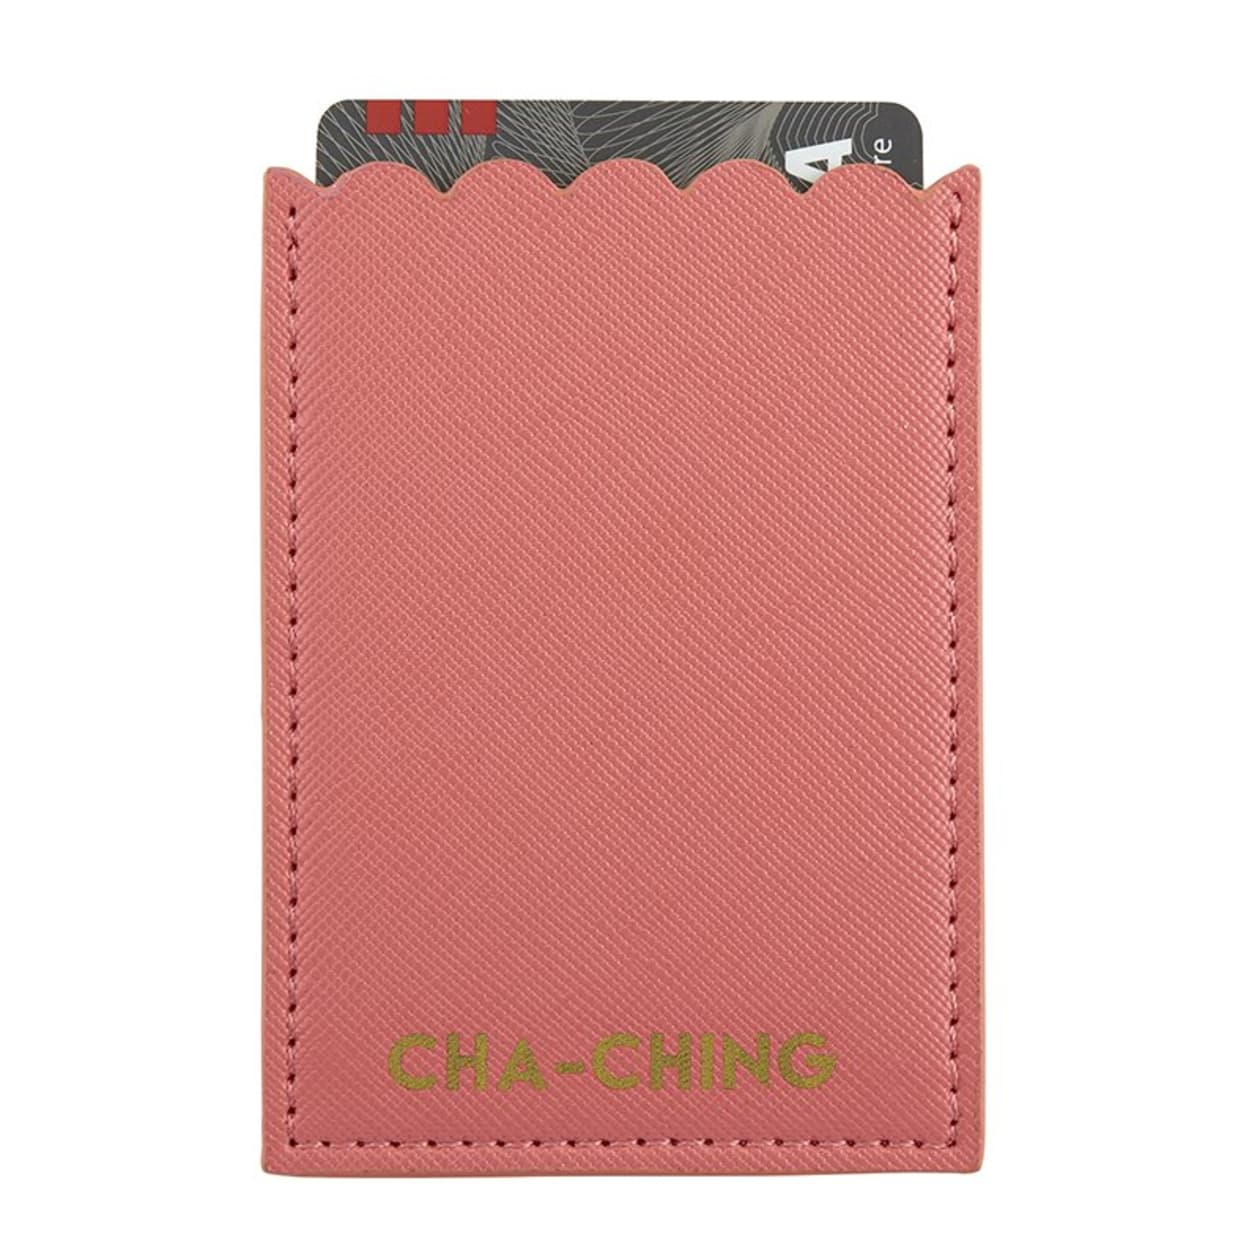 Cha Ching Phone Pocket in Coral Pink | Adhesive Pocket 2.5" x 3.5" for Cards or Cash